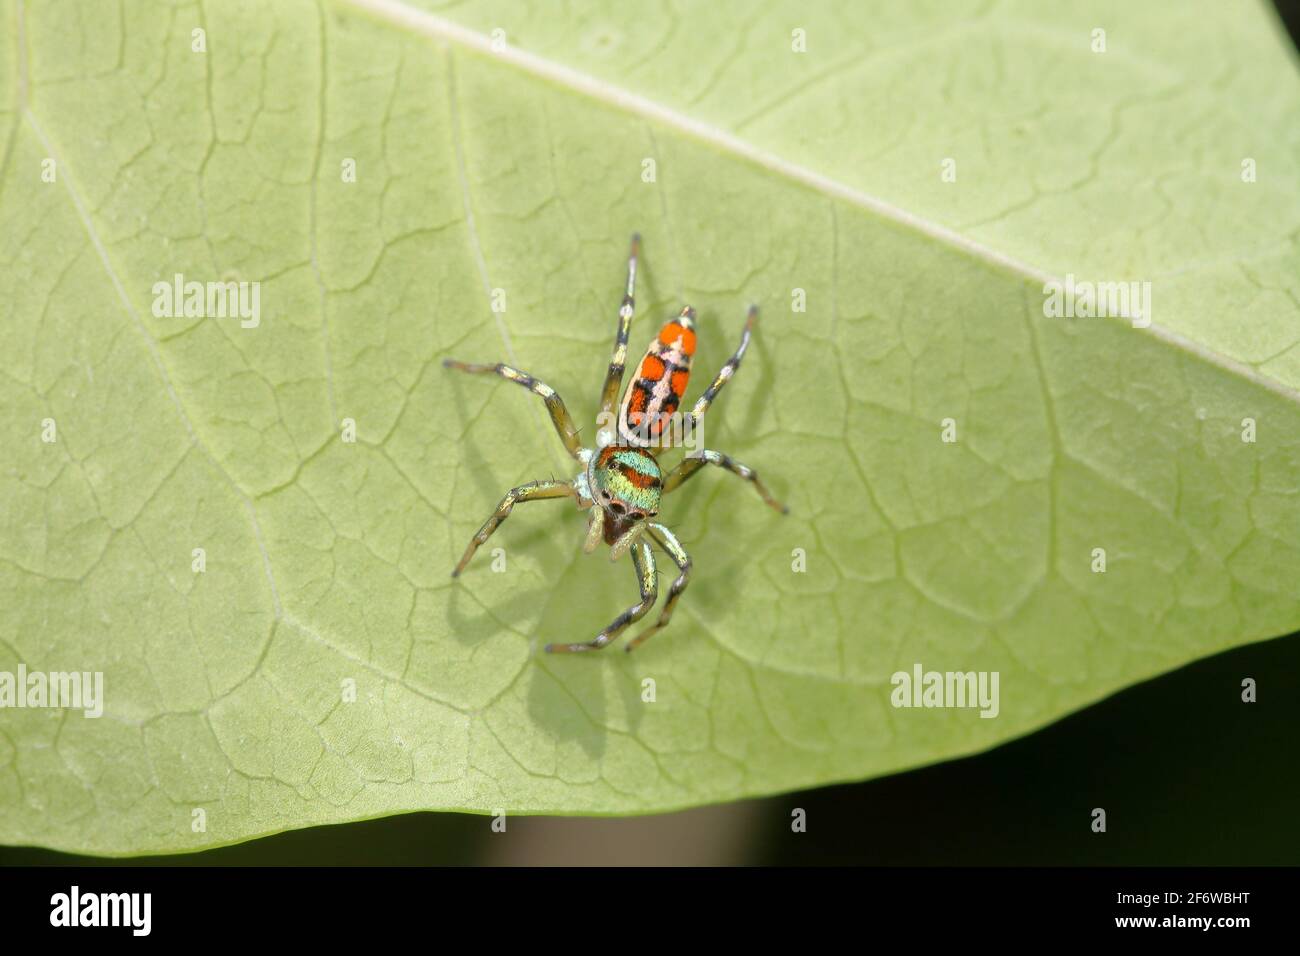 Jumping spiders, cosmophasis, spiders in the family salticidae, asia Stock Photo